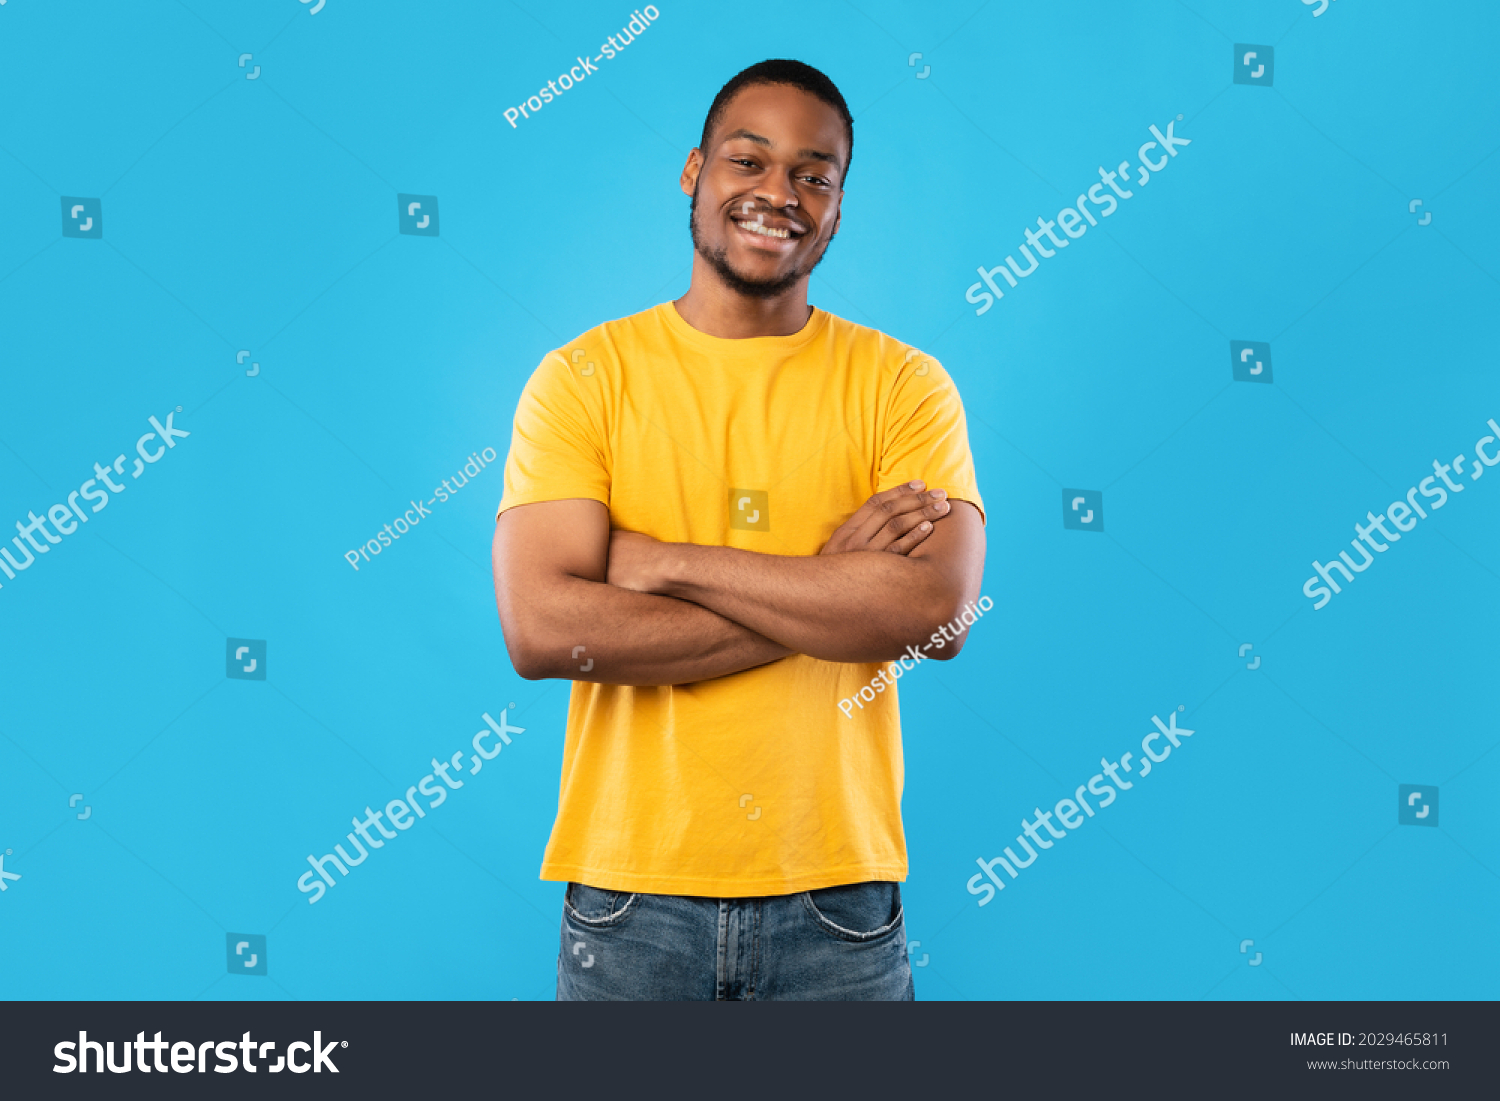 Cheerful African American Guy Smiling To Camera Posing Crossing Hands Standing Over Blue Background. Studio Shot Of Happy Self-Confident Black Millennial Man Expressing Positive Emotions #2029465811